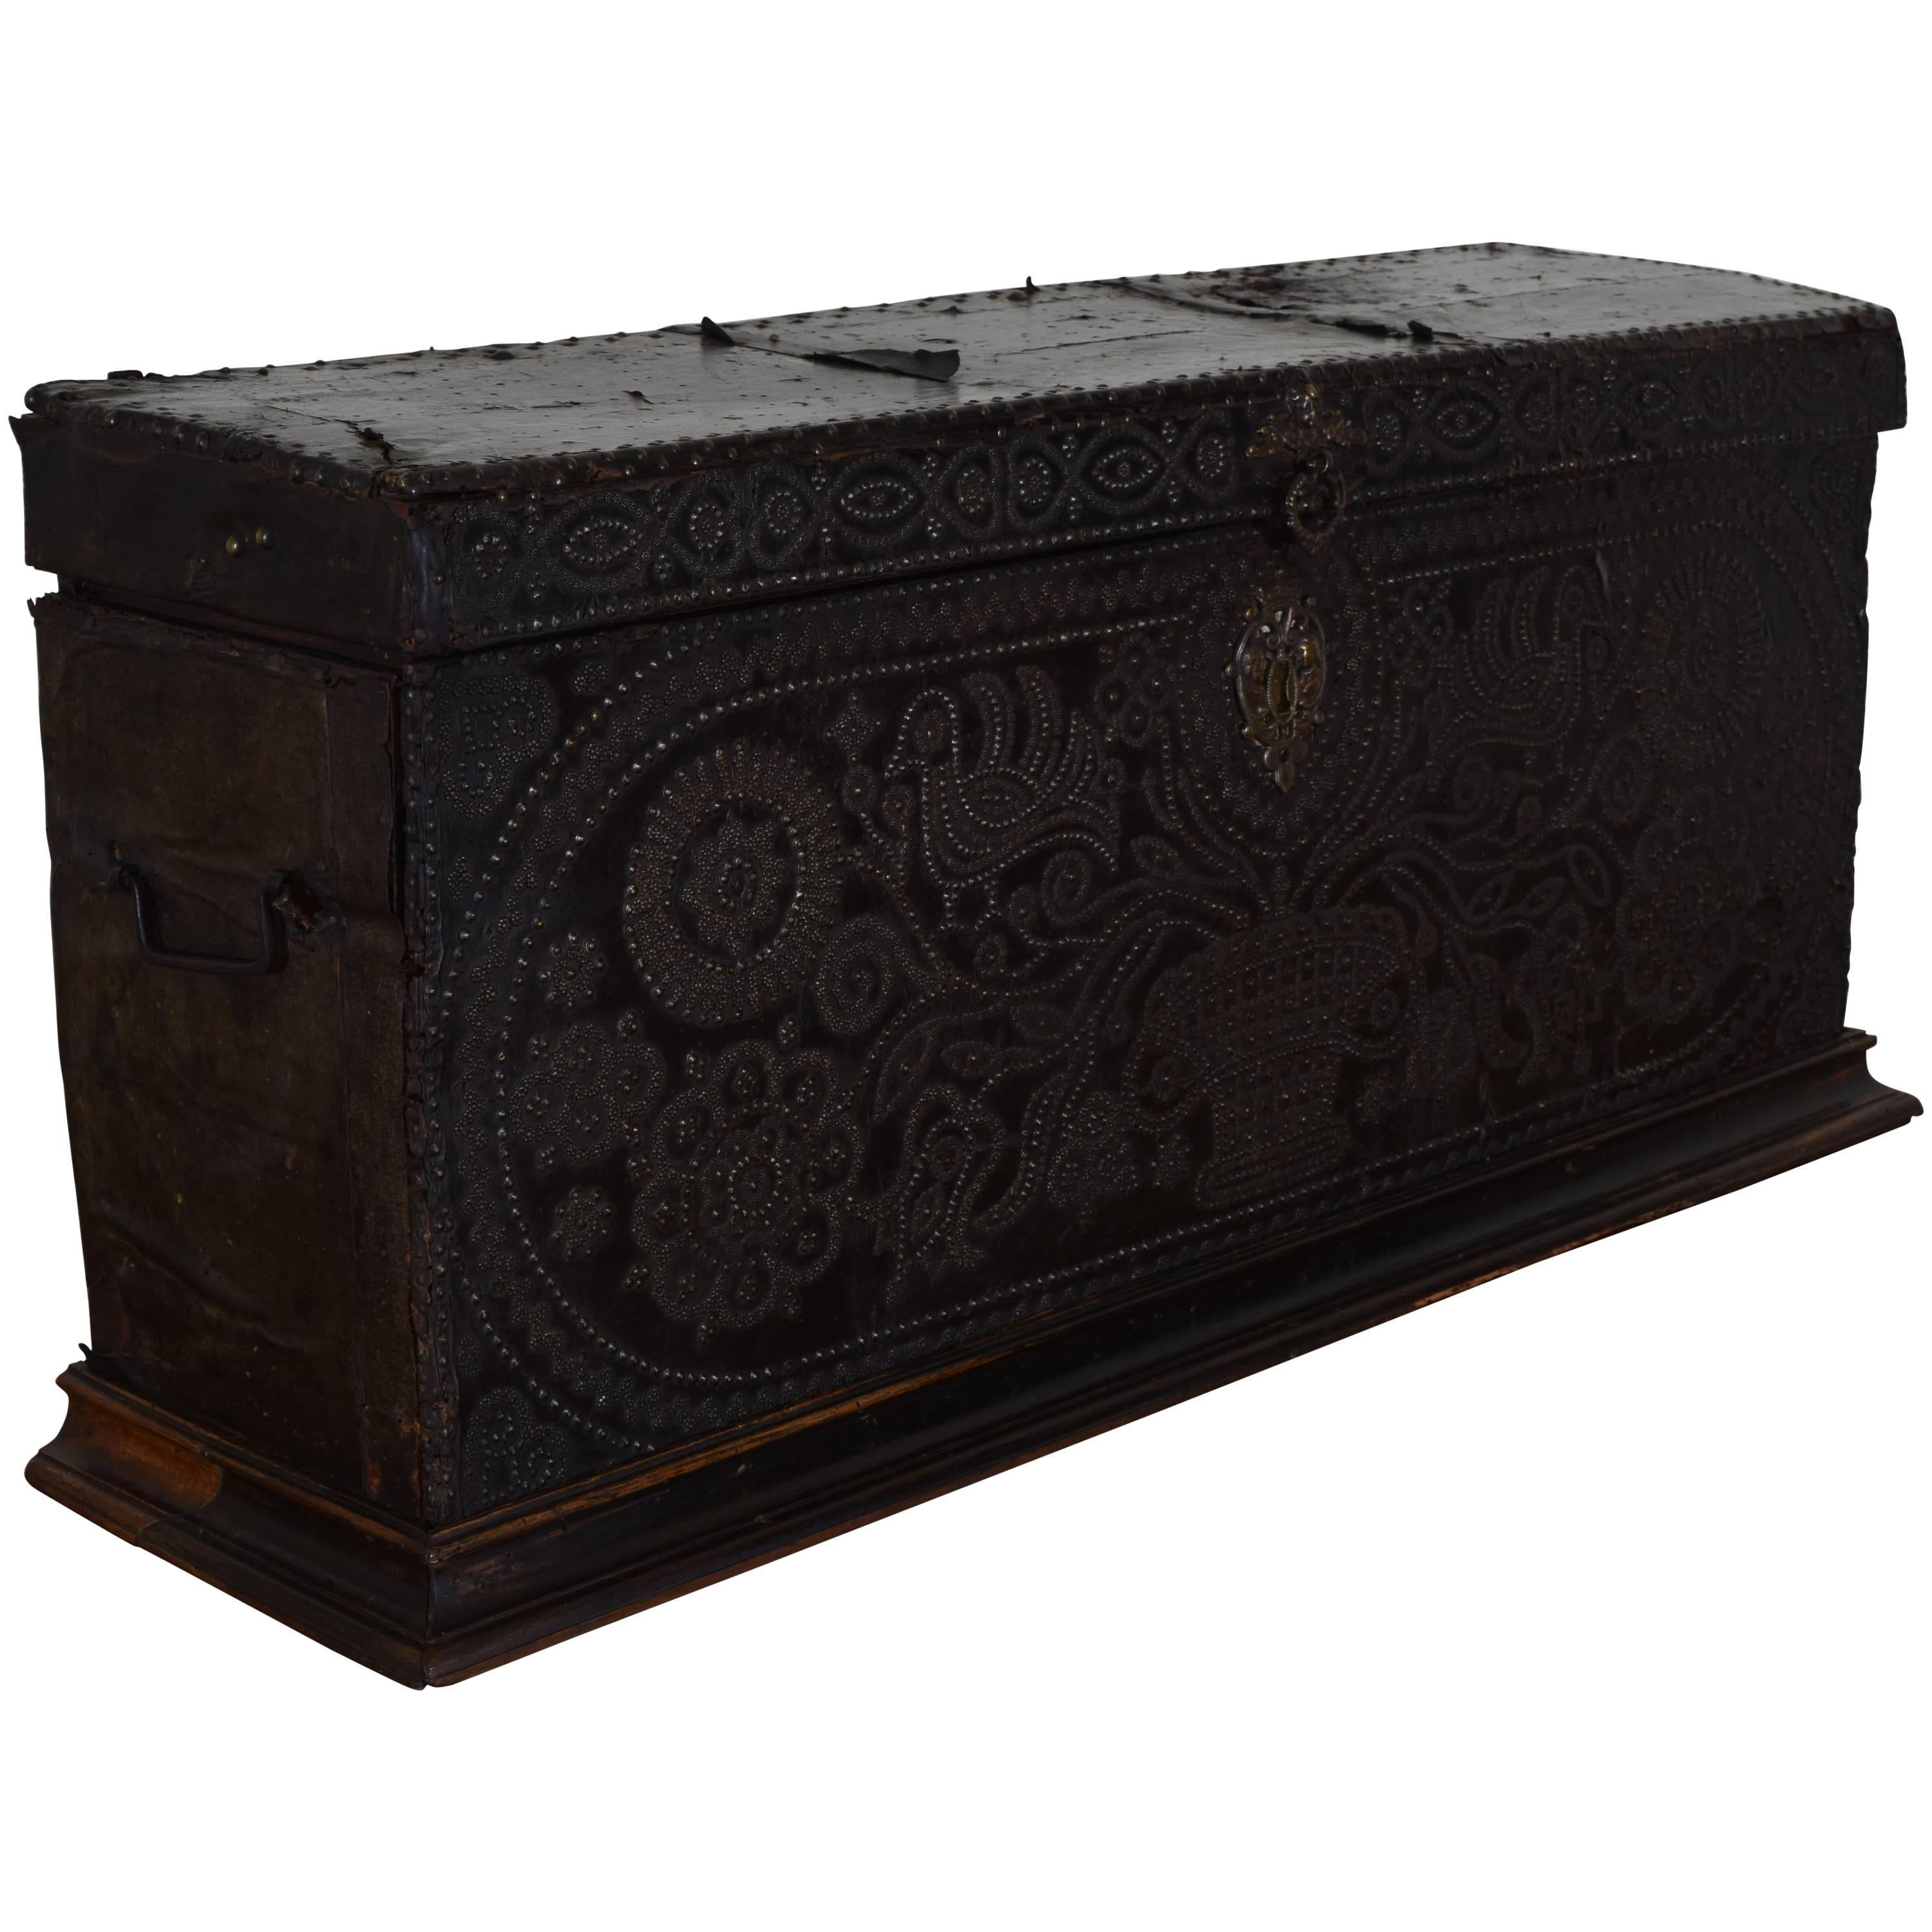 Italian Baroque Leather Covered and Brass Decorated Traveling Chest